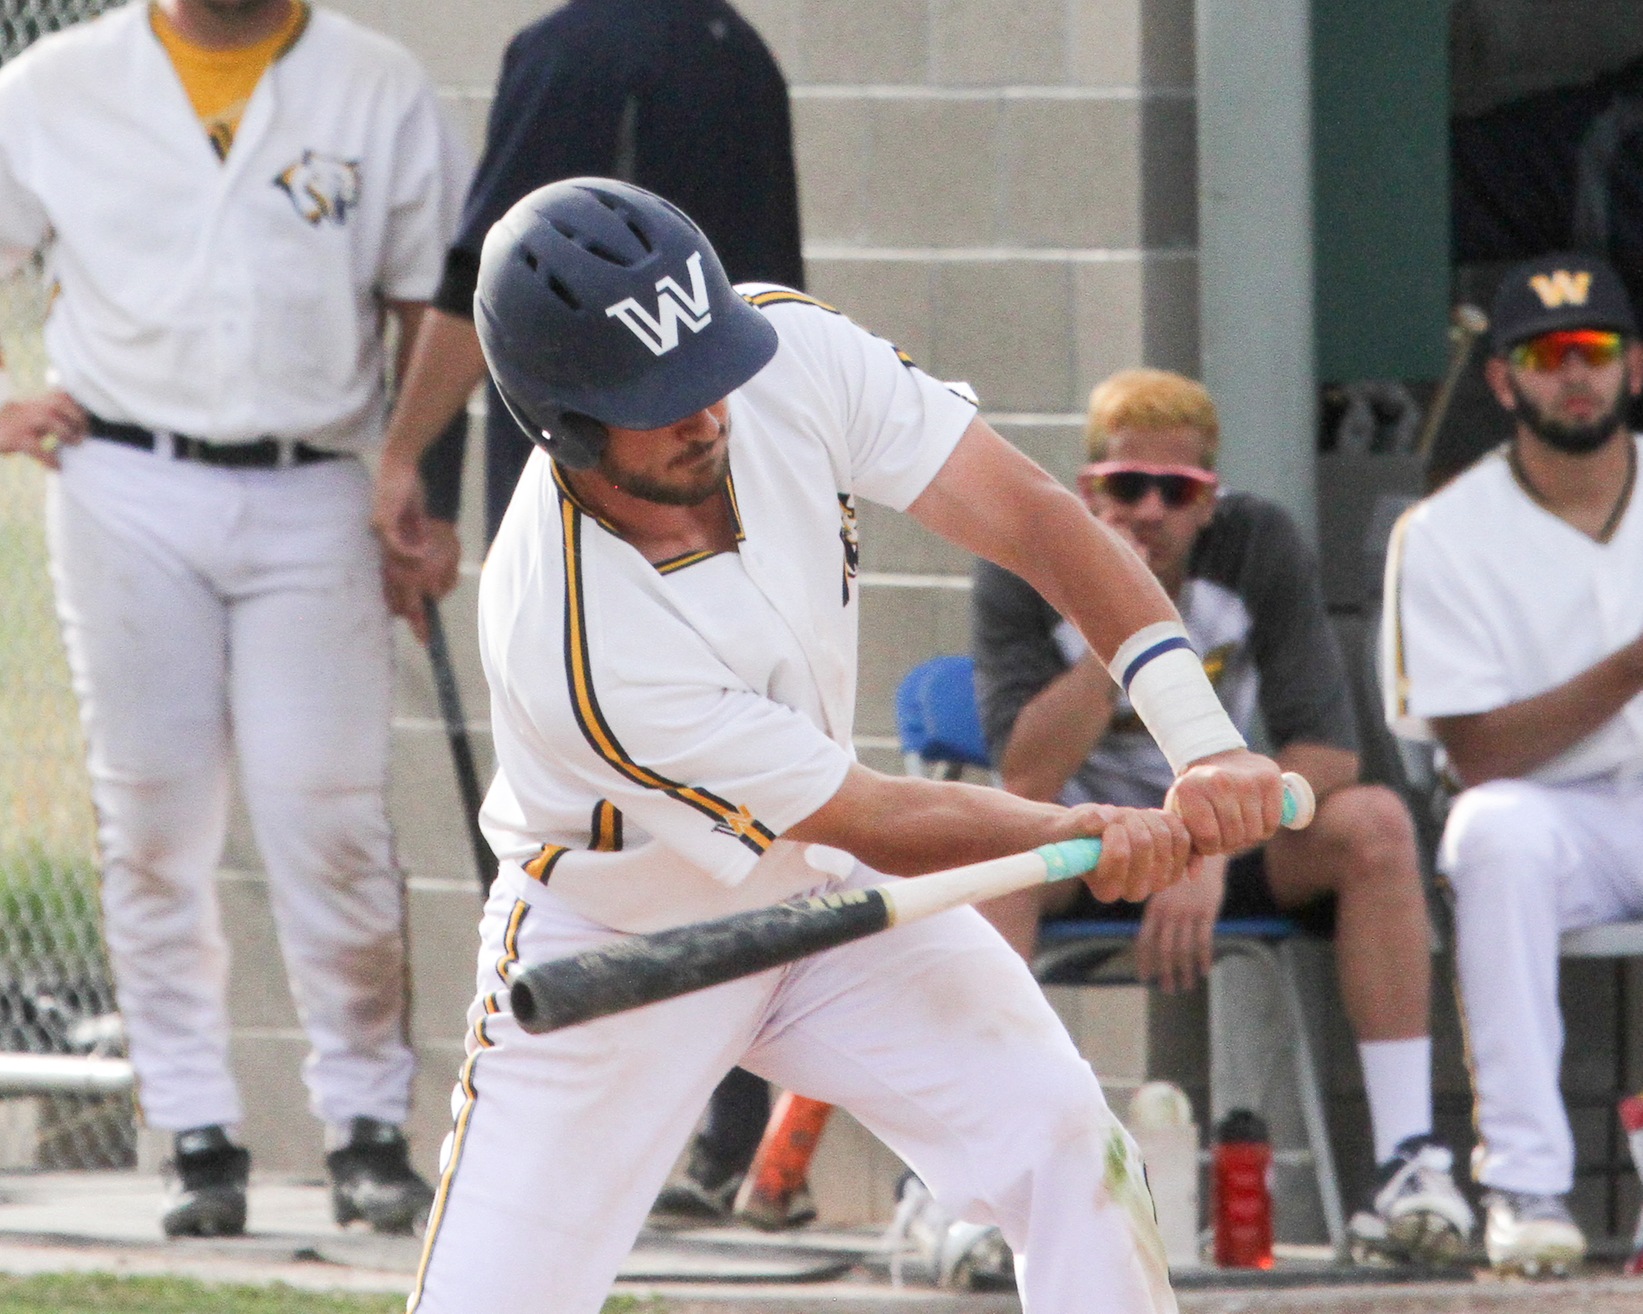 WNCC baseball sweeps NJC, needs one win Sunday to win conference title